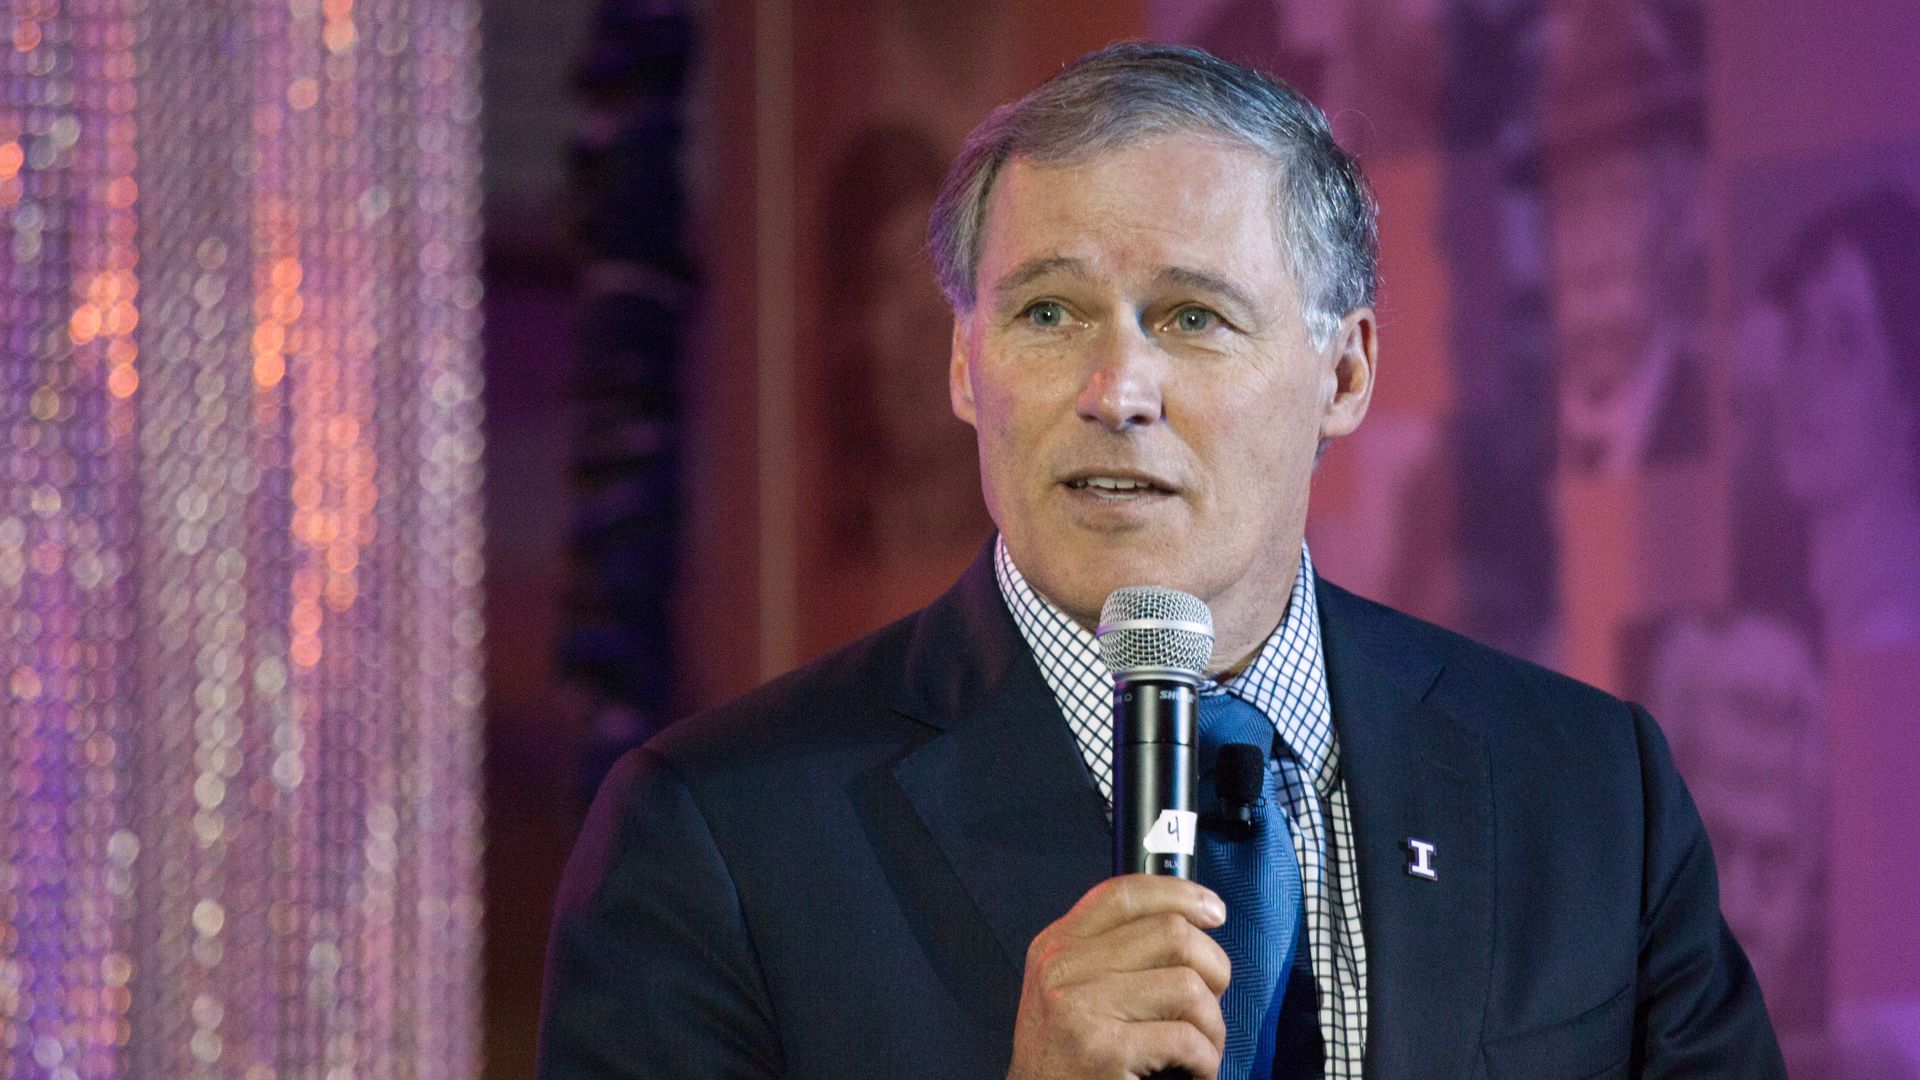 Gov. Jay Inslee holding a microphone